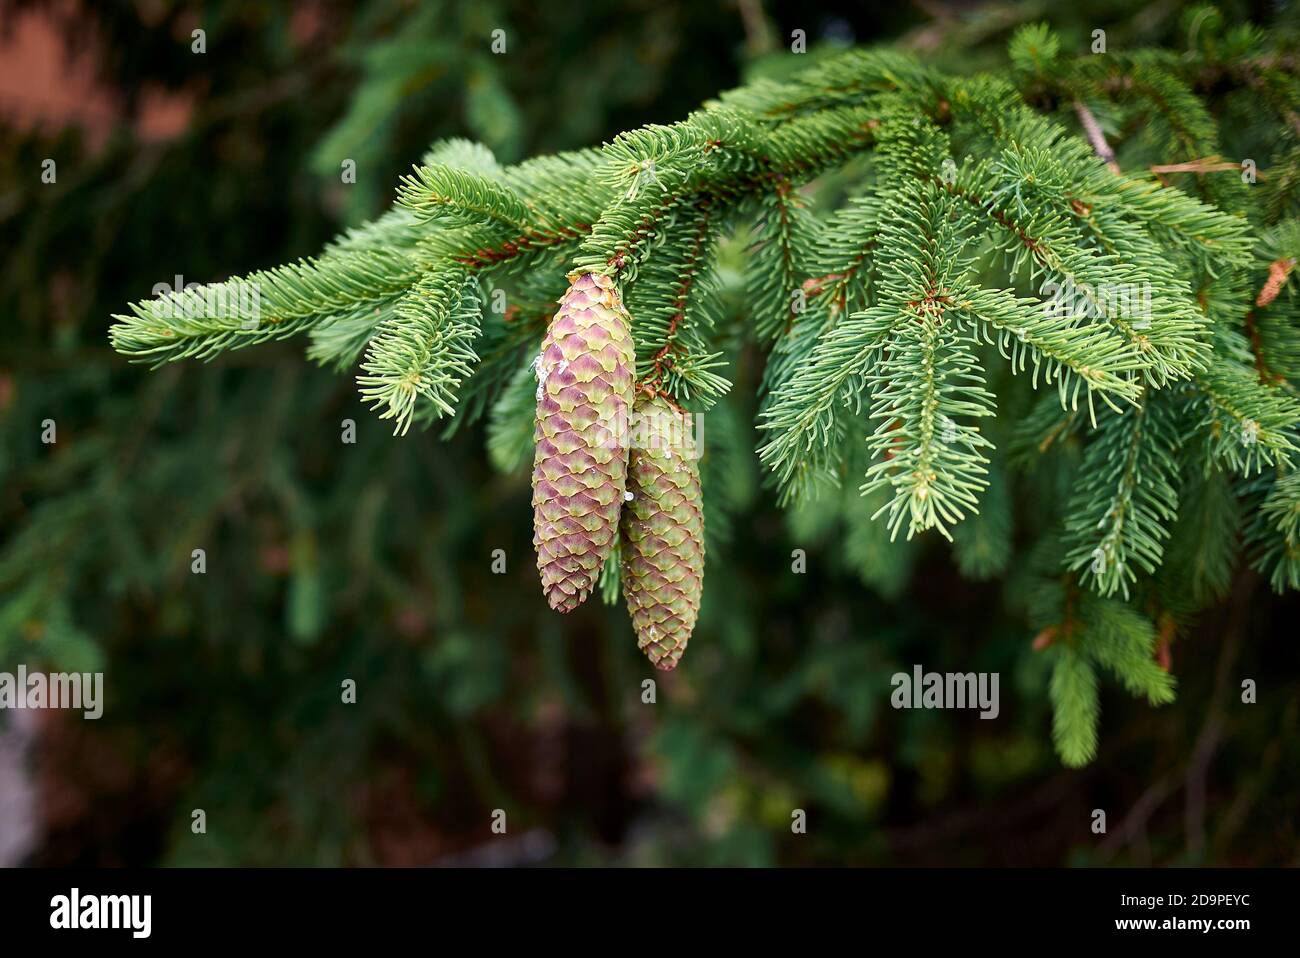 Picea abies branch close up Stock Photo